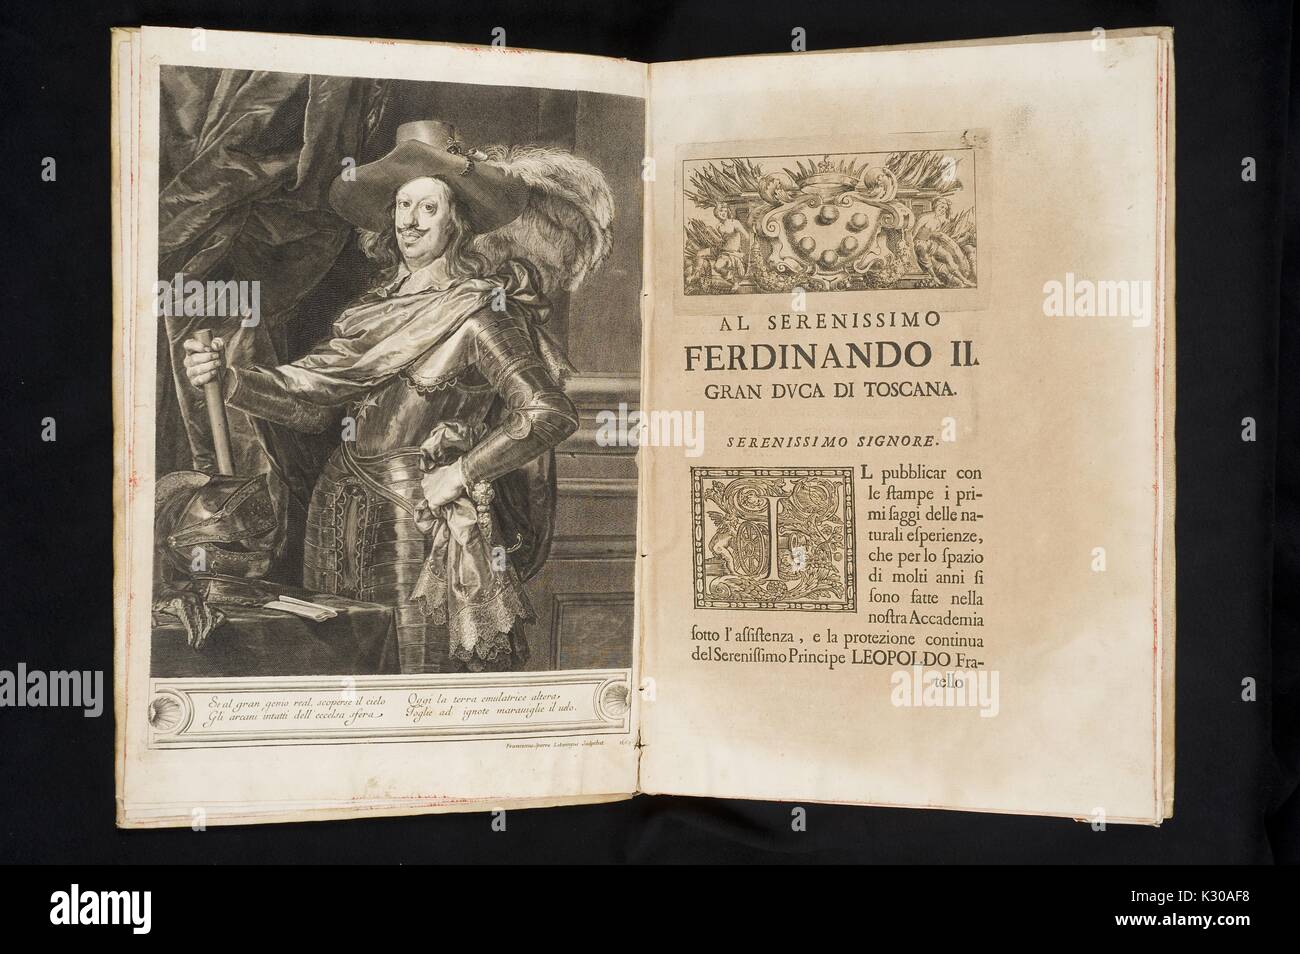 Illustration of Ferdinando II, the Grand Duke of Tuscany and a patron of the Accademia del Cimento, in a first edition copy of Saggi di Naturali Esperienze published by the Accademia del Cimento from the Dr. Elliott and Eileen Hinkes Collection of Rare Books of Scientific Discovery housed in the Sheridan Libraries of Johns Hopkins University, 2010. Stock Photo